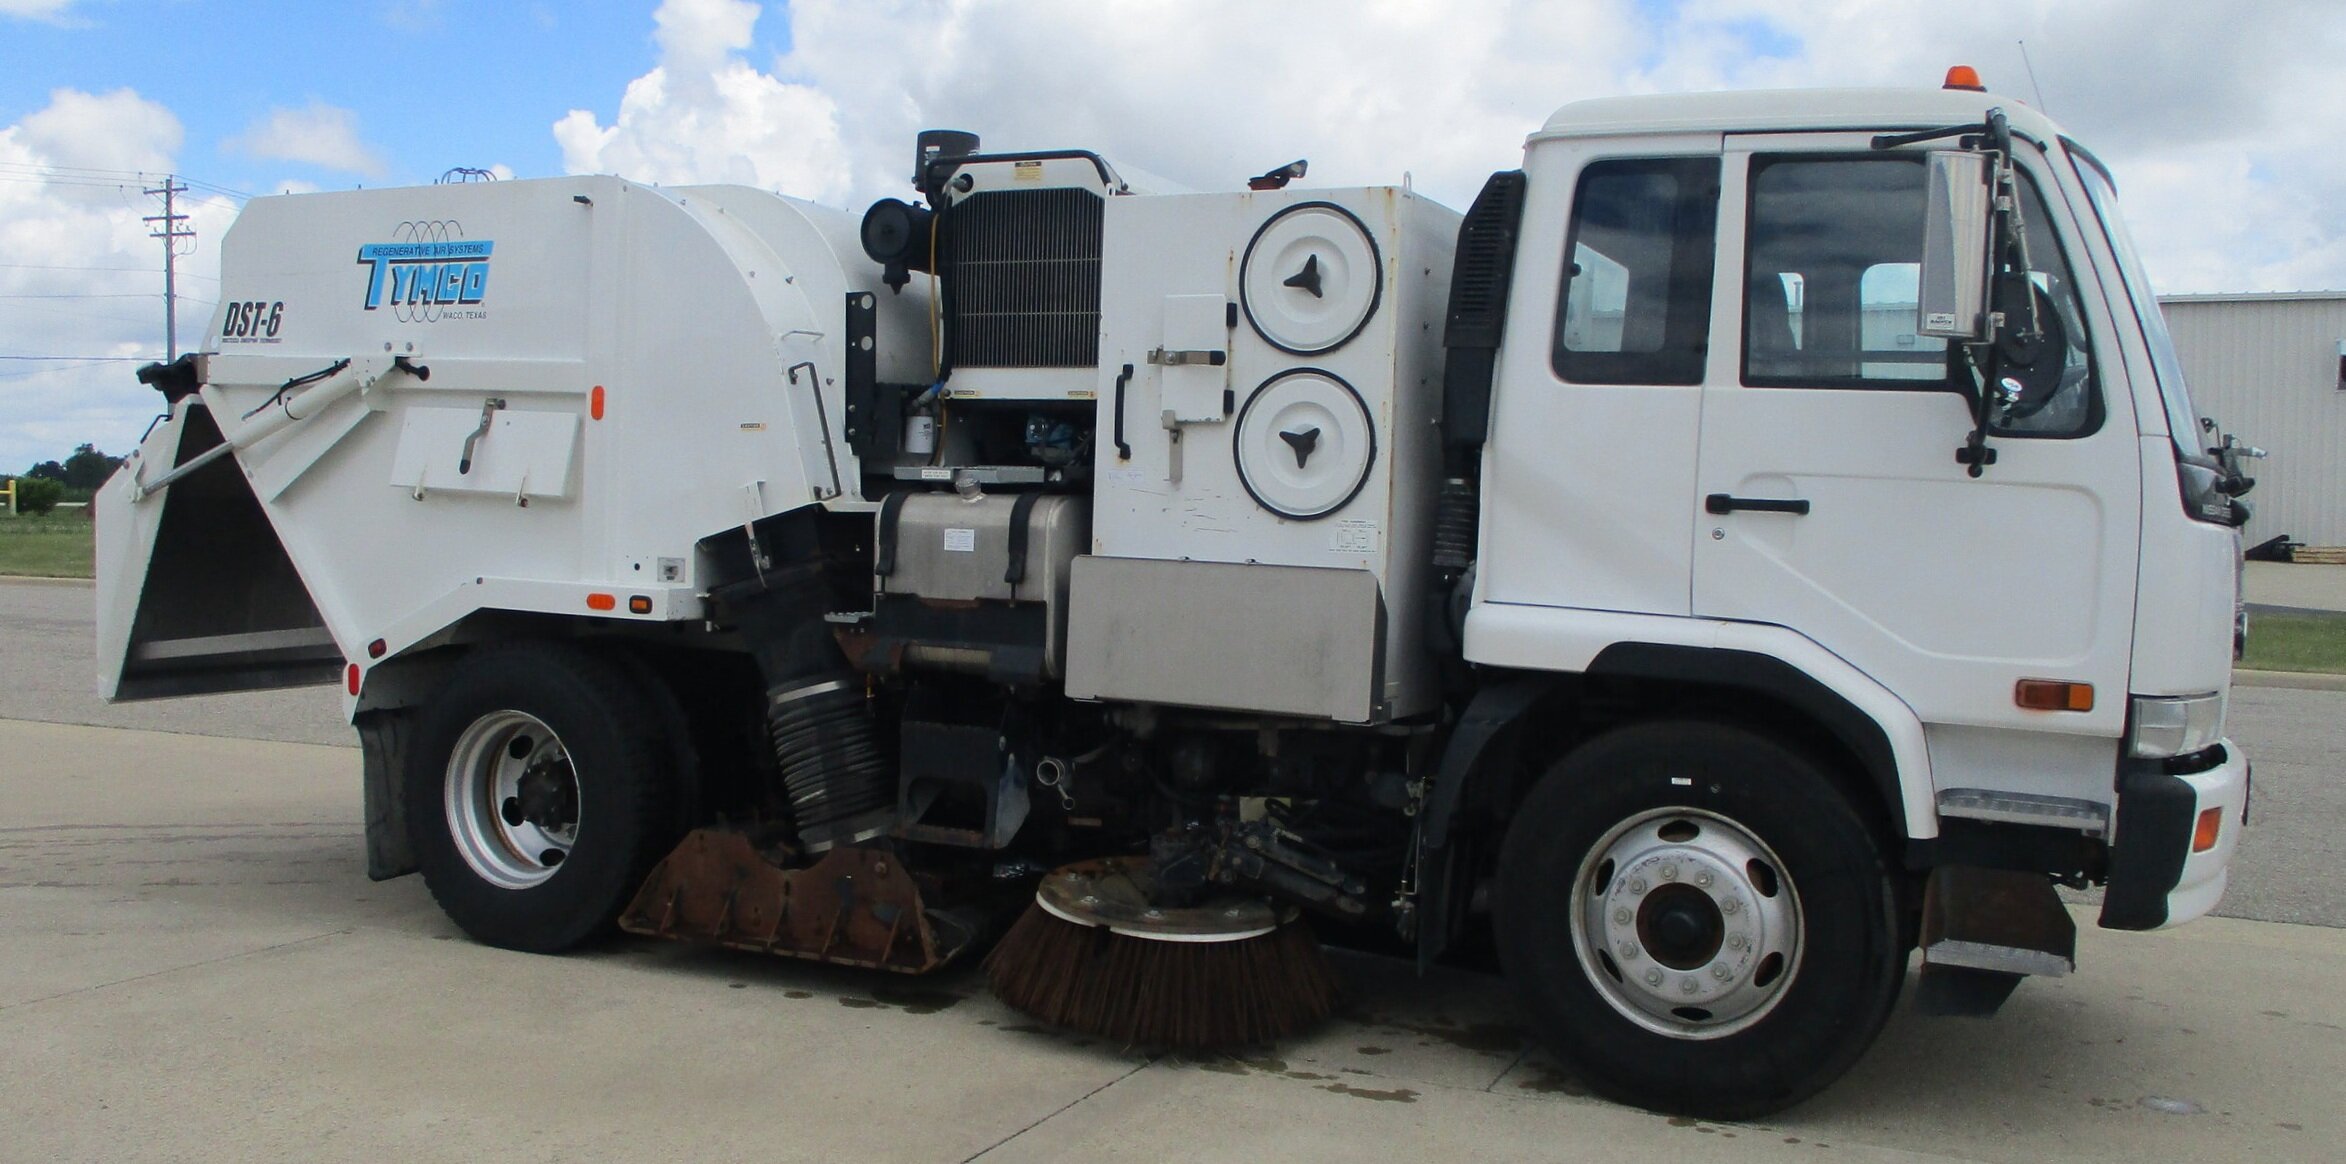 Parts for Tymco Street Sweepers — Lacal Equipment Replacement Parts